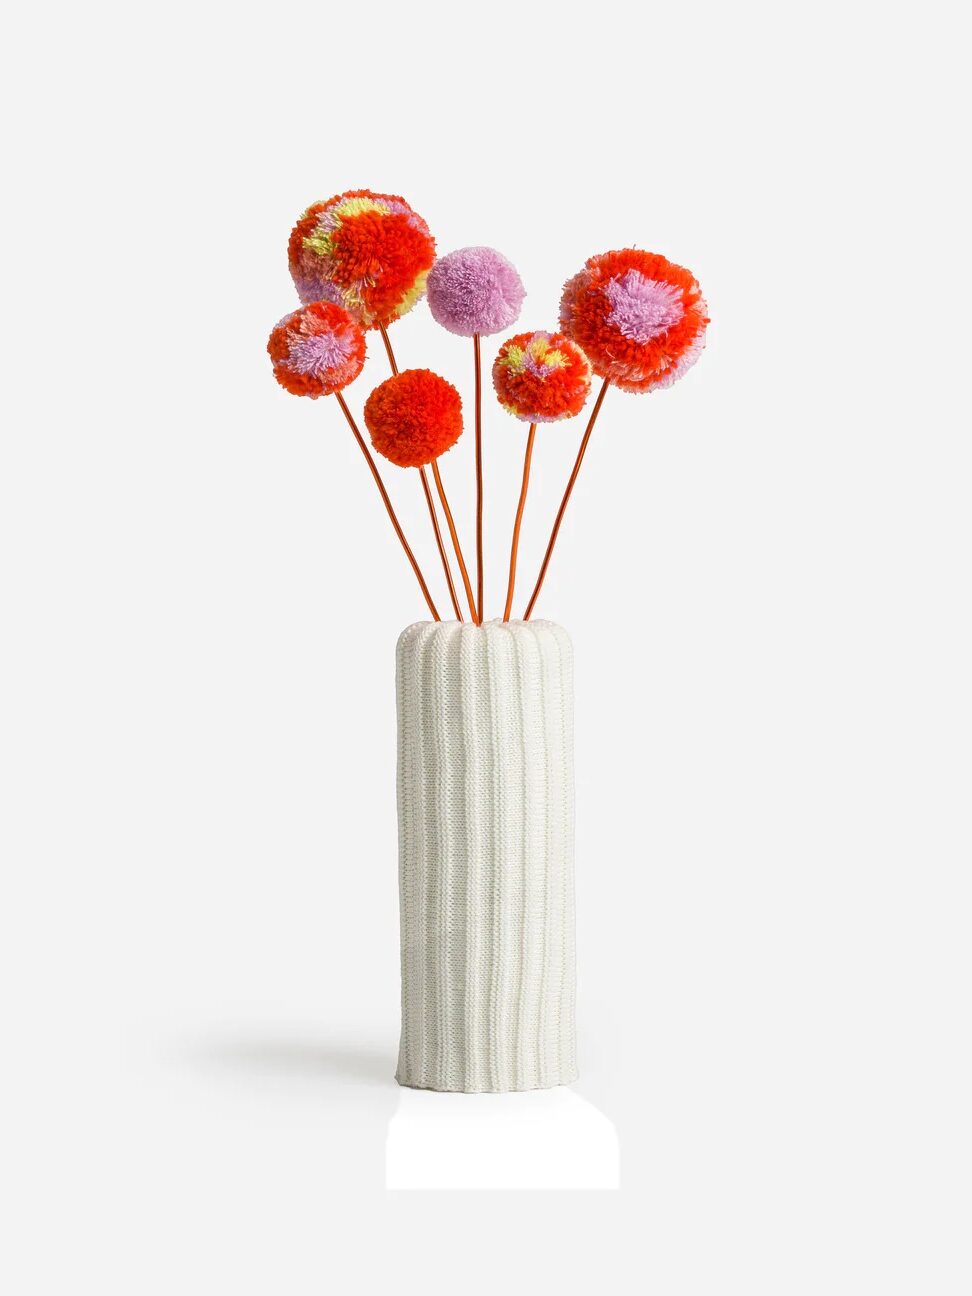 A white knit vase holds a red and lavender bouquet of poms